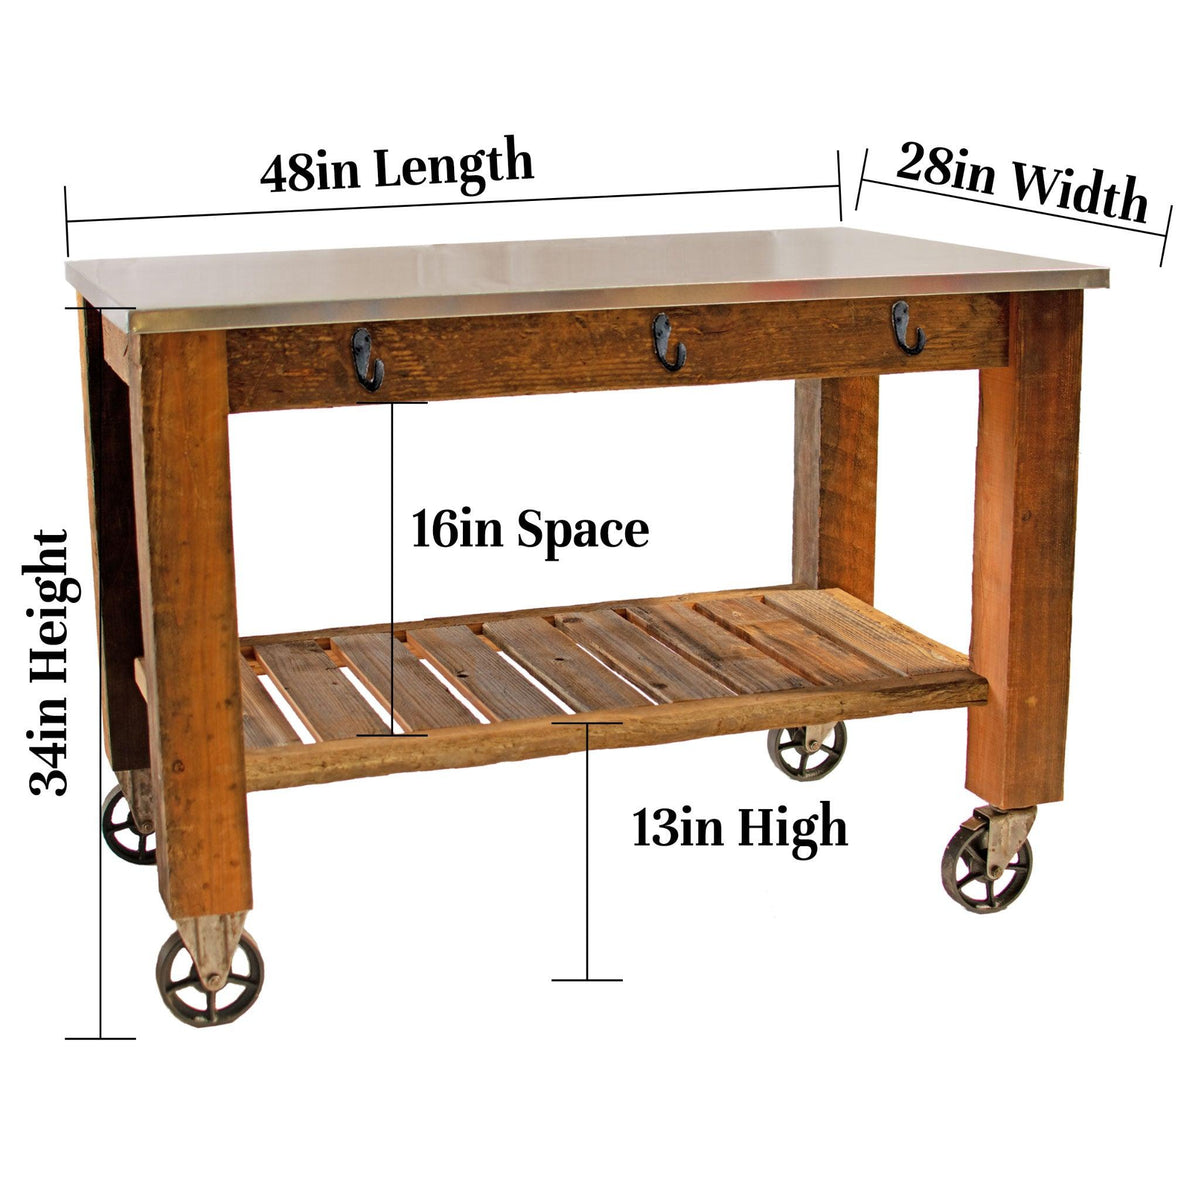 Heavy Duty Wood Workshop Table - Solid Redwood Table